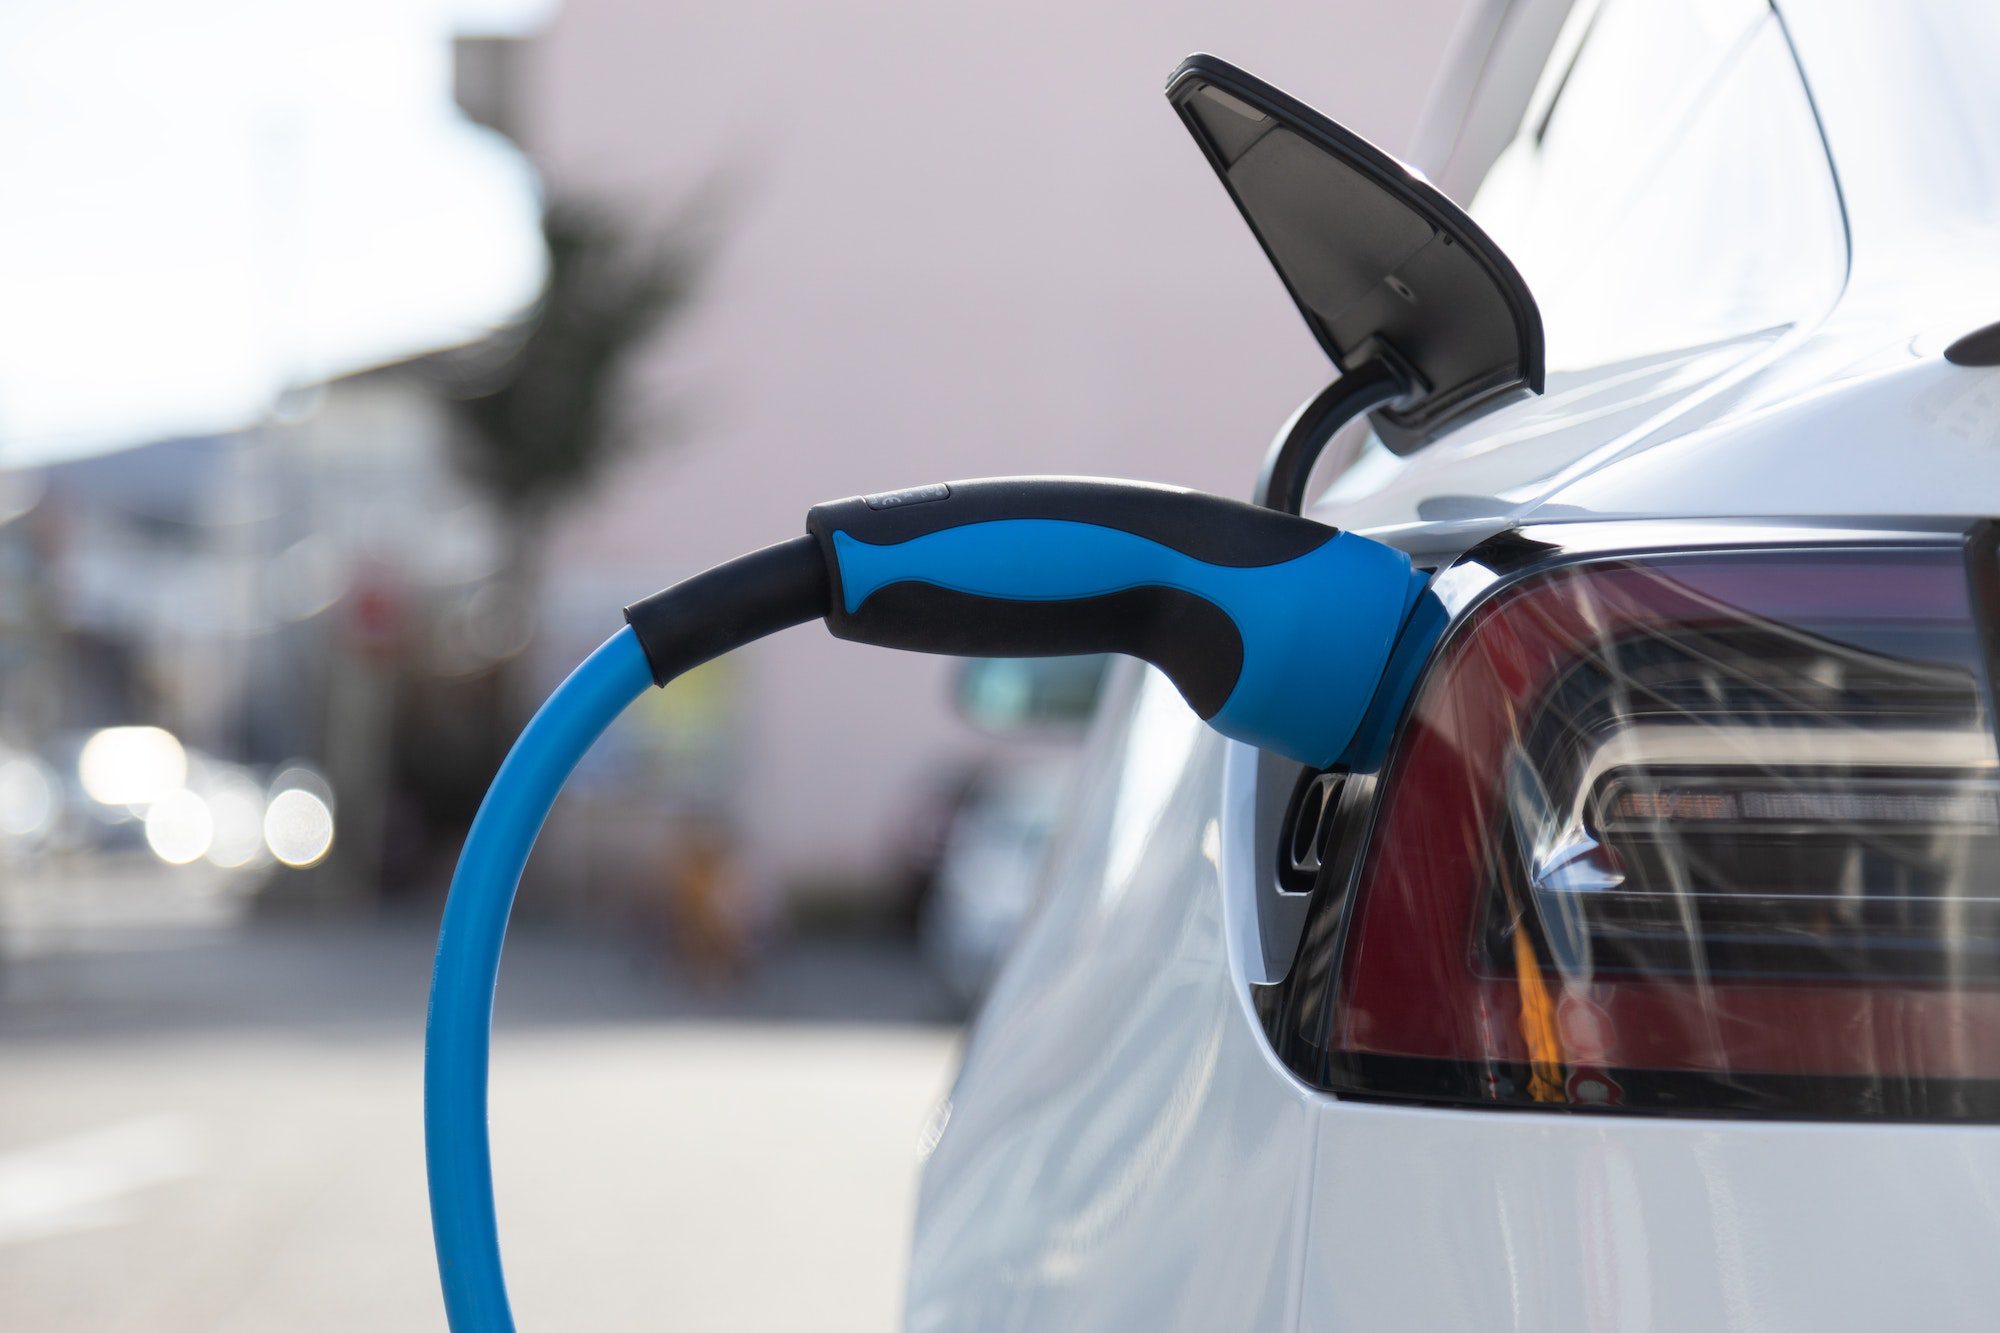 The Ultimate Guide to Choosing Your Home Electric Car Charger